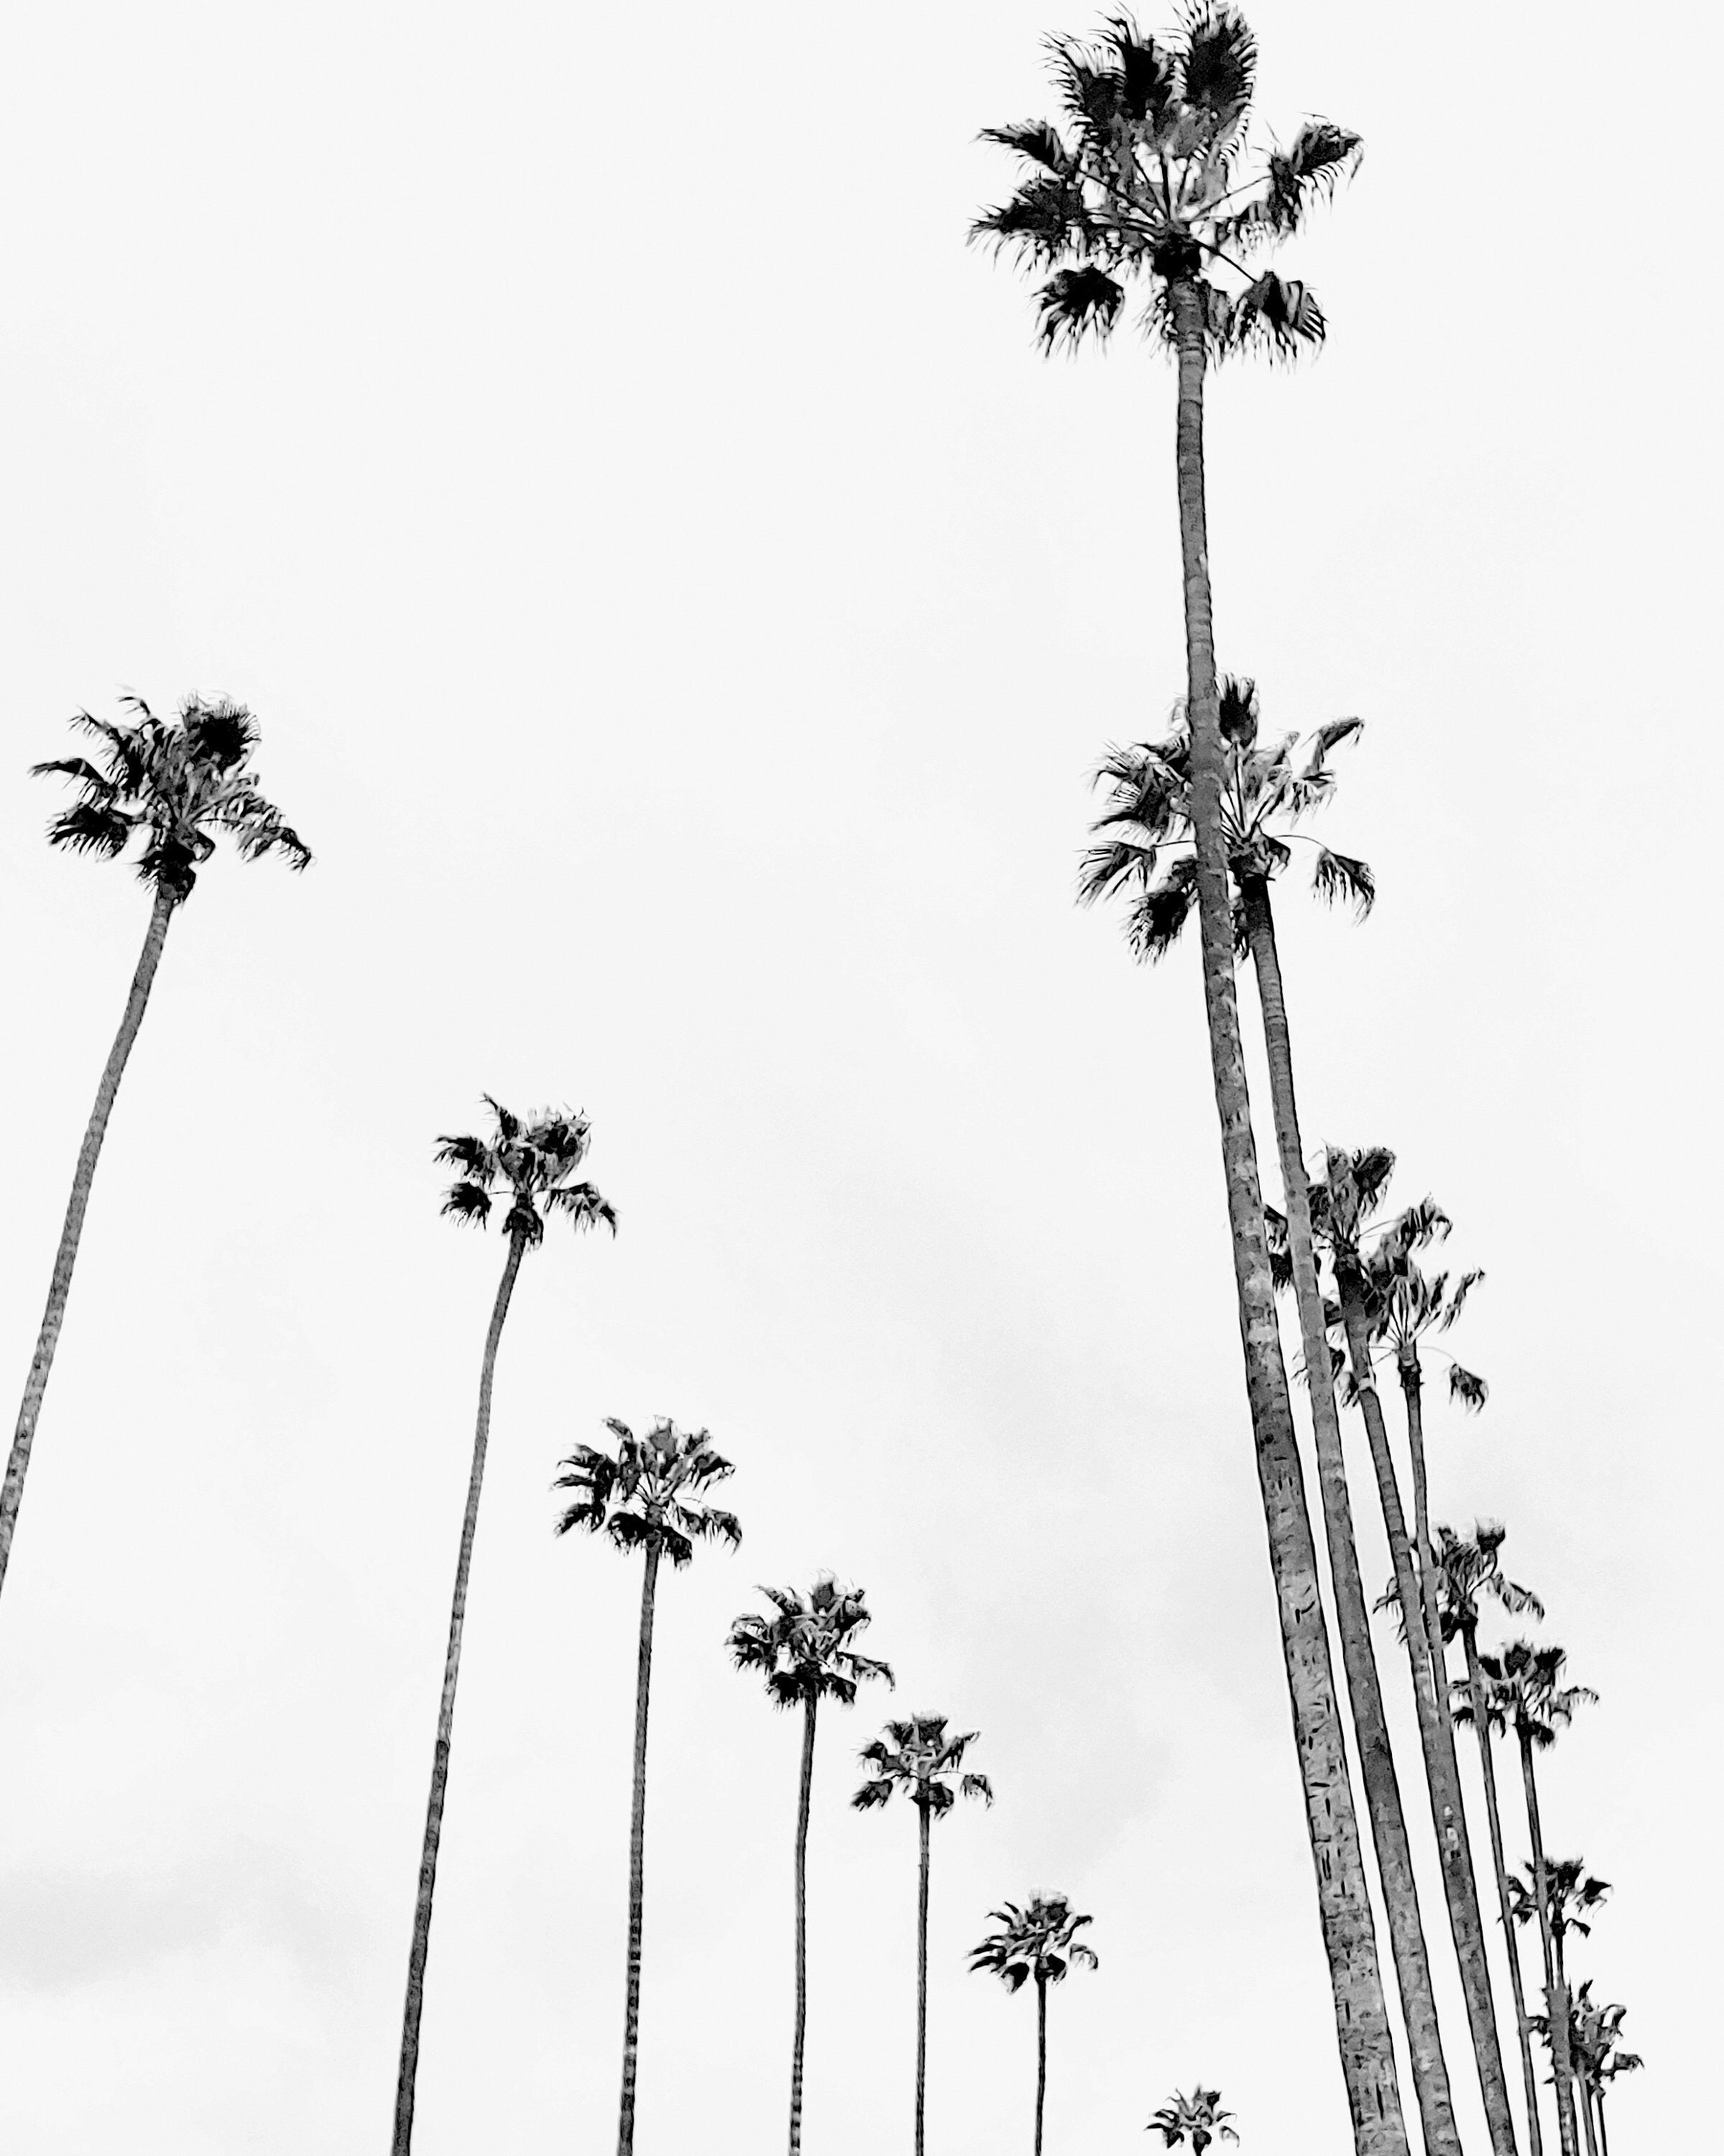 Black and white photograph of palm trees against a white sky. - Los Angeles